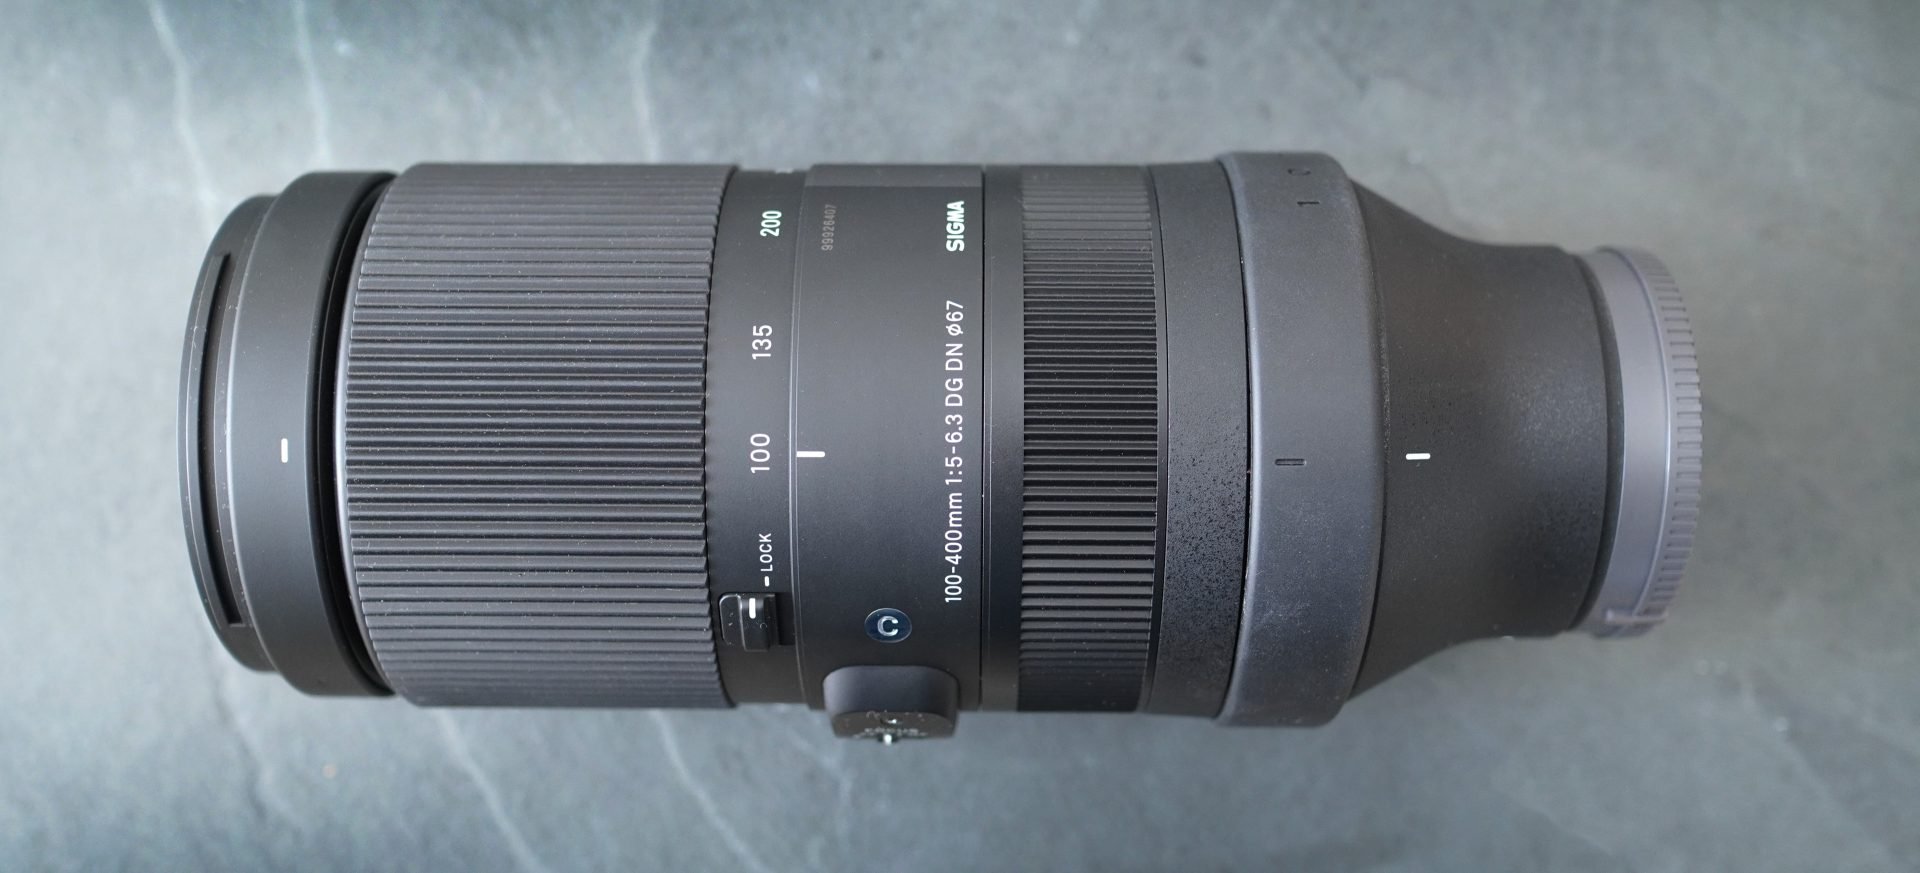 Sigma 100-400mm f5-6.3 DG DN review | Cameralabs